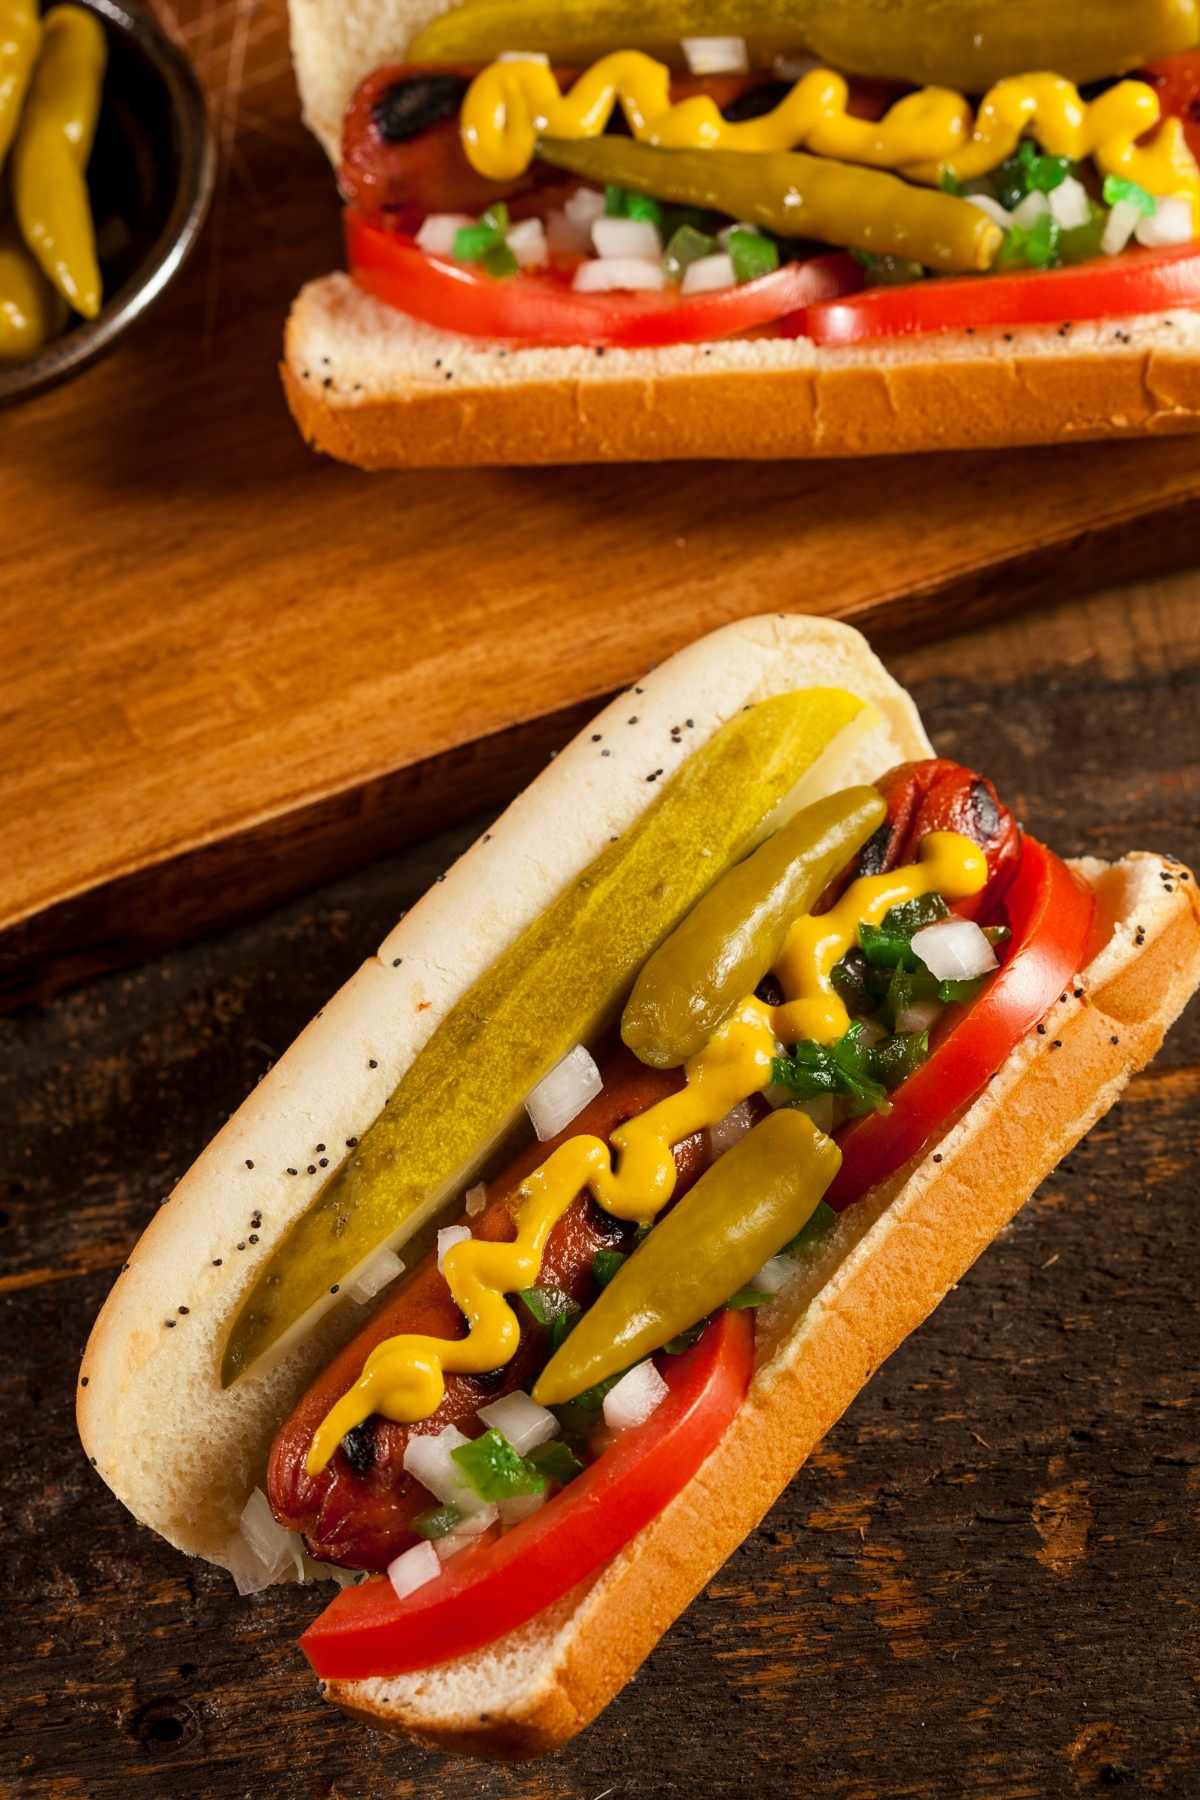 A Chicago-style hot dog is something you’ve got to experience. Juicy all-beef frankfurters are served in a toasted poppy seed bun and topped with delicious veggies.